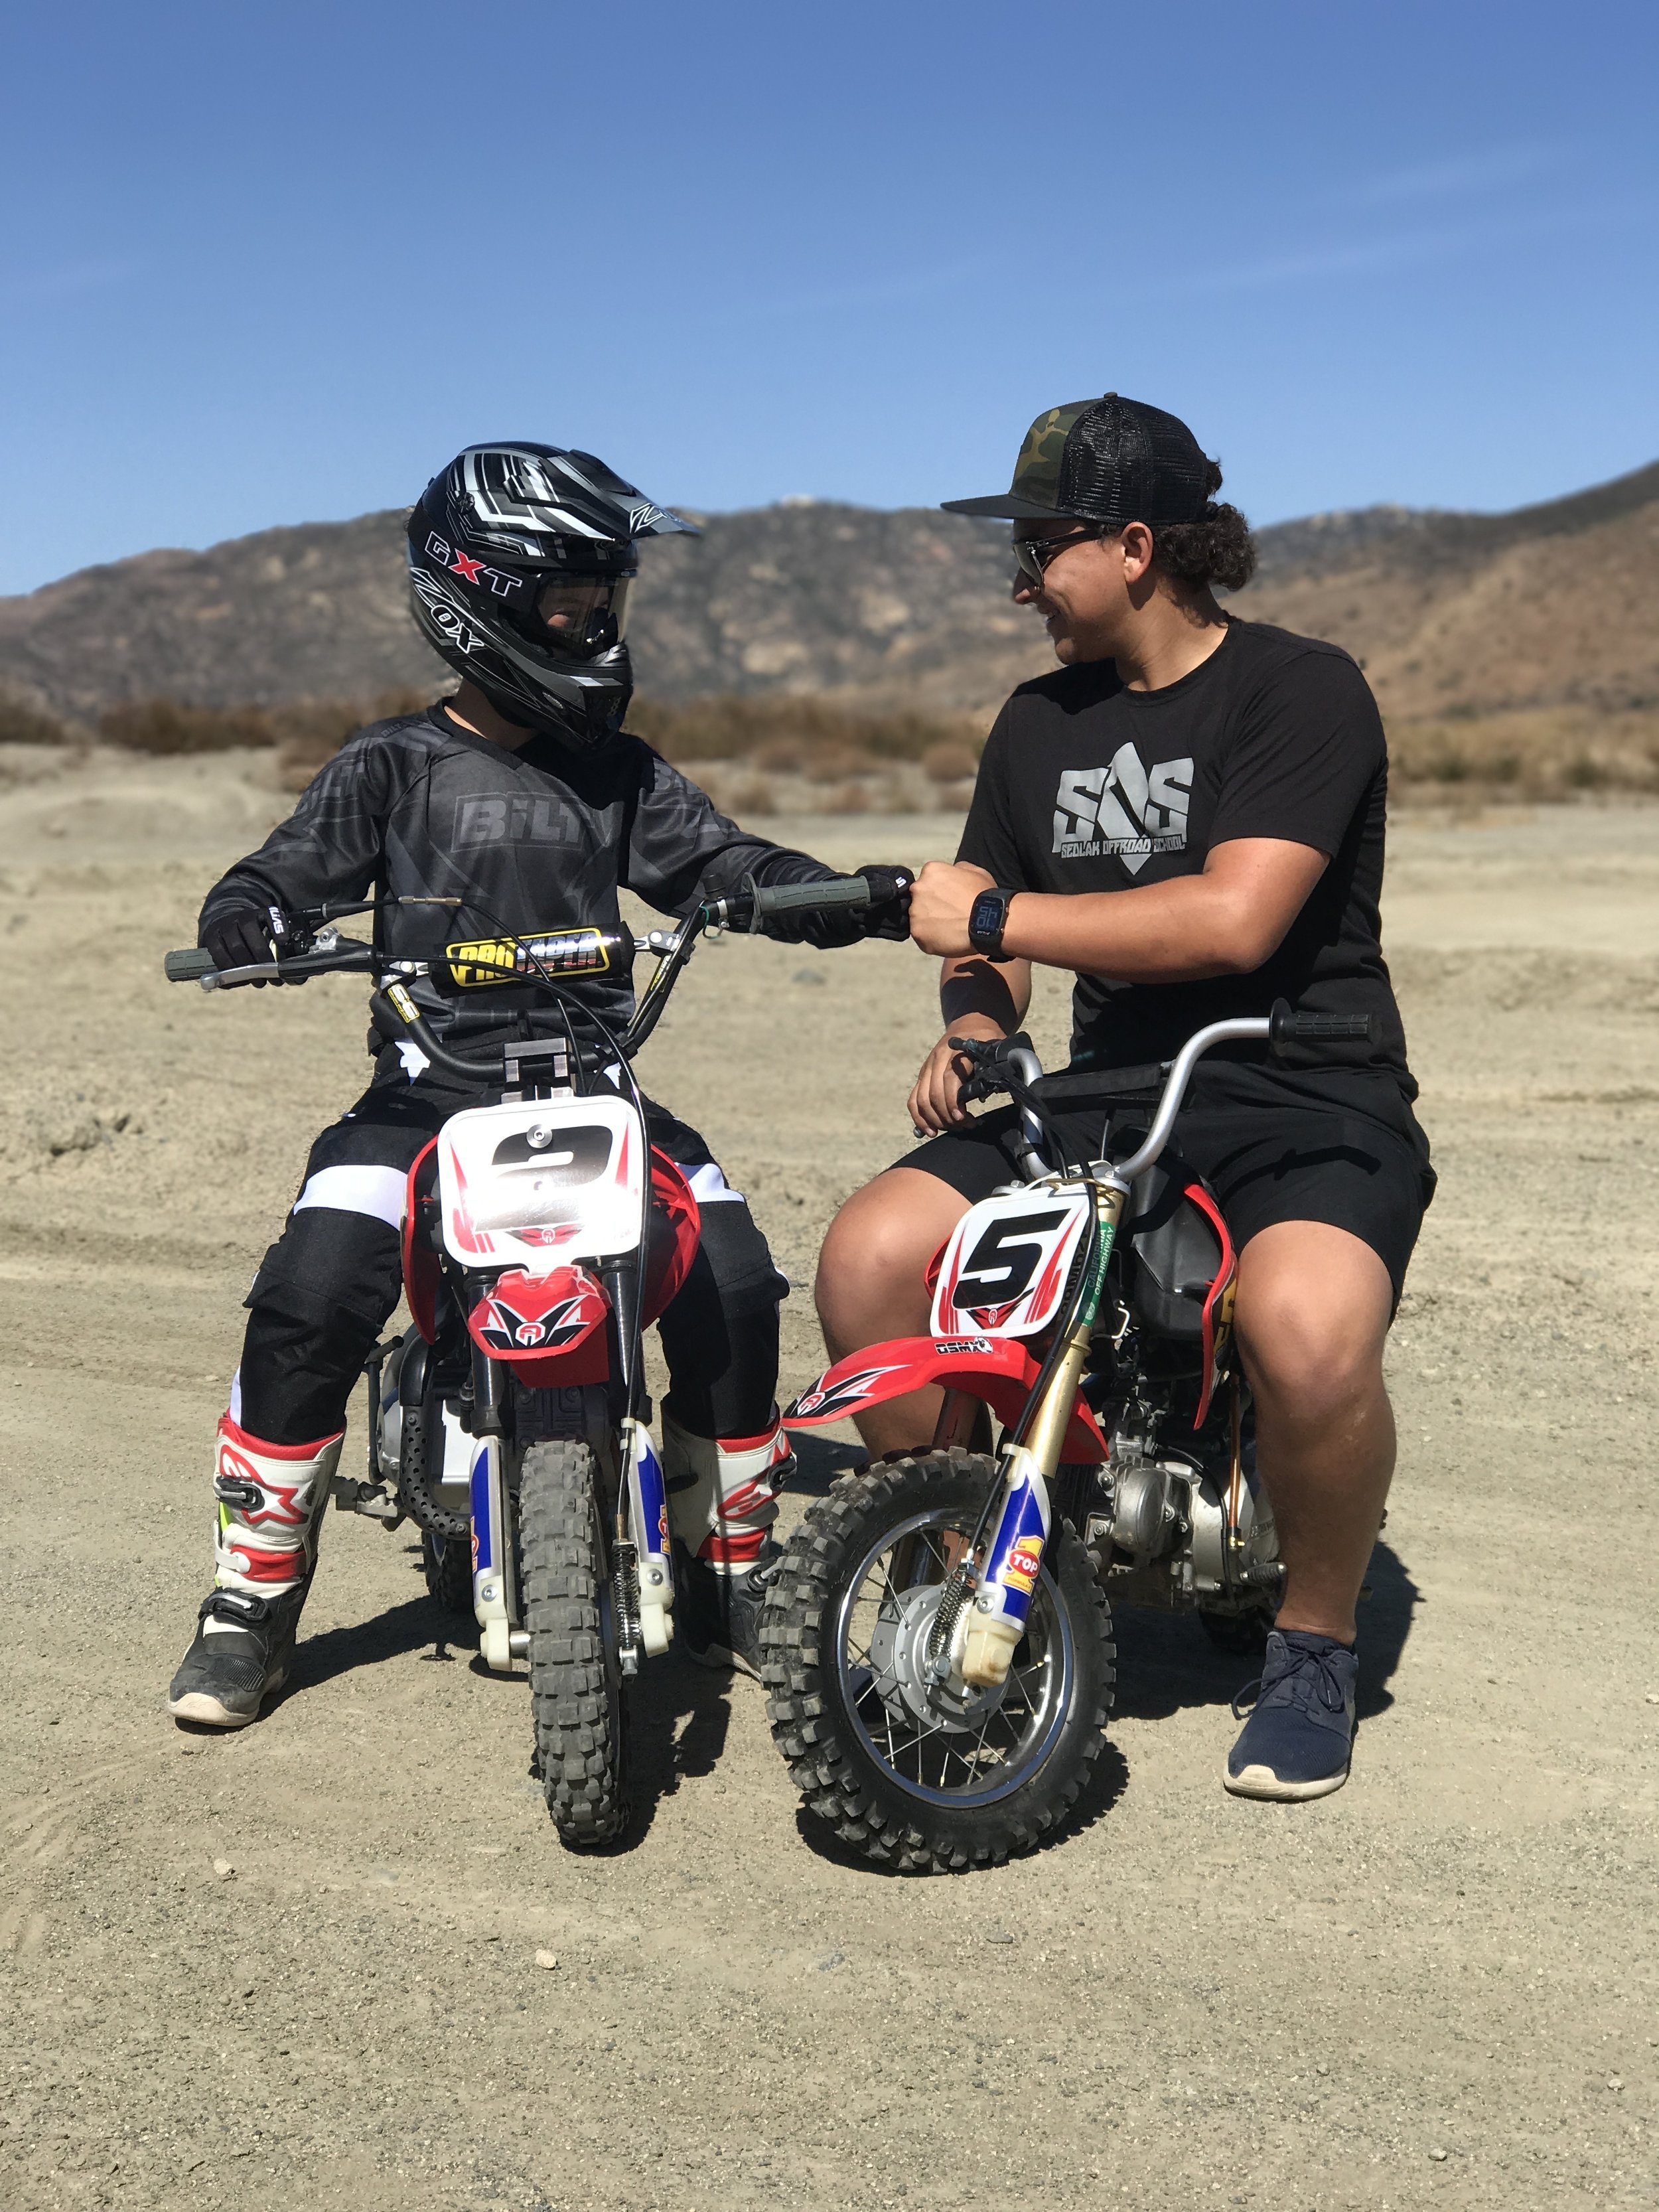 Learn to ride and control a dirt bike through our step by step introduction